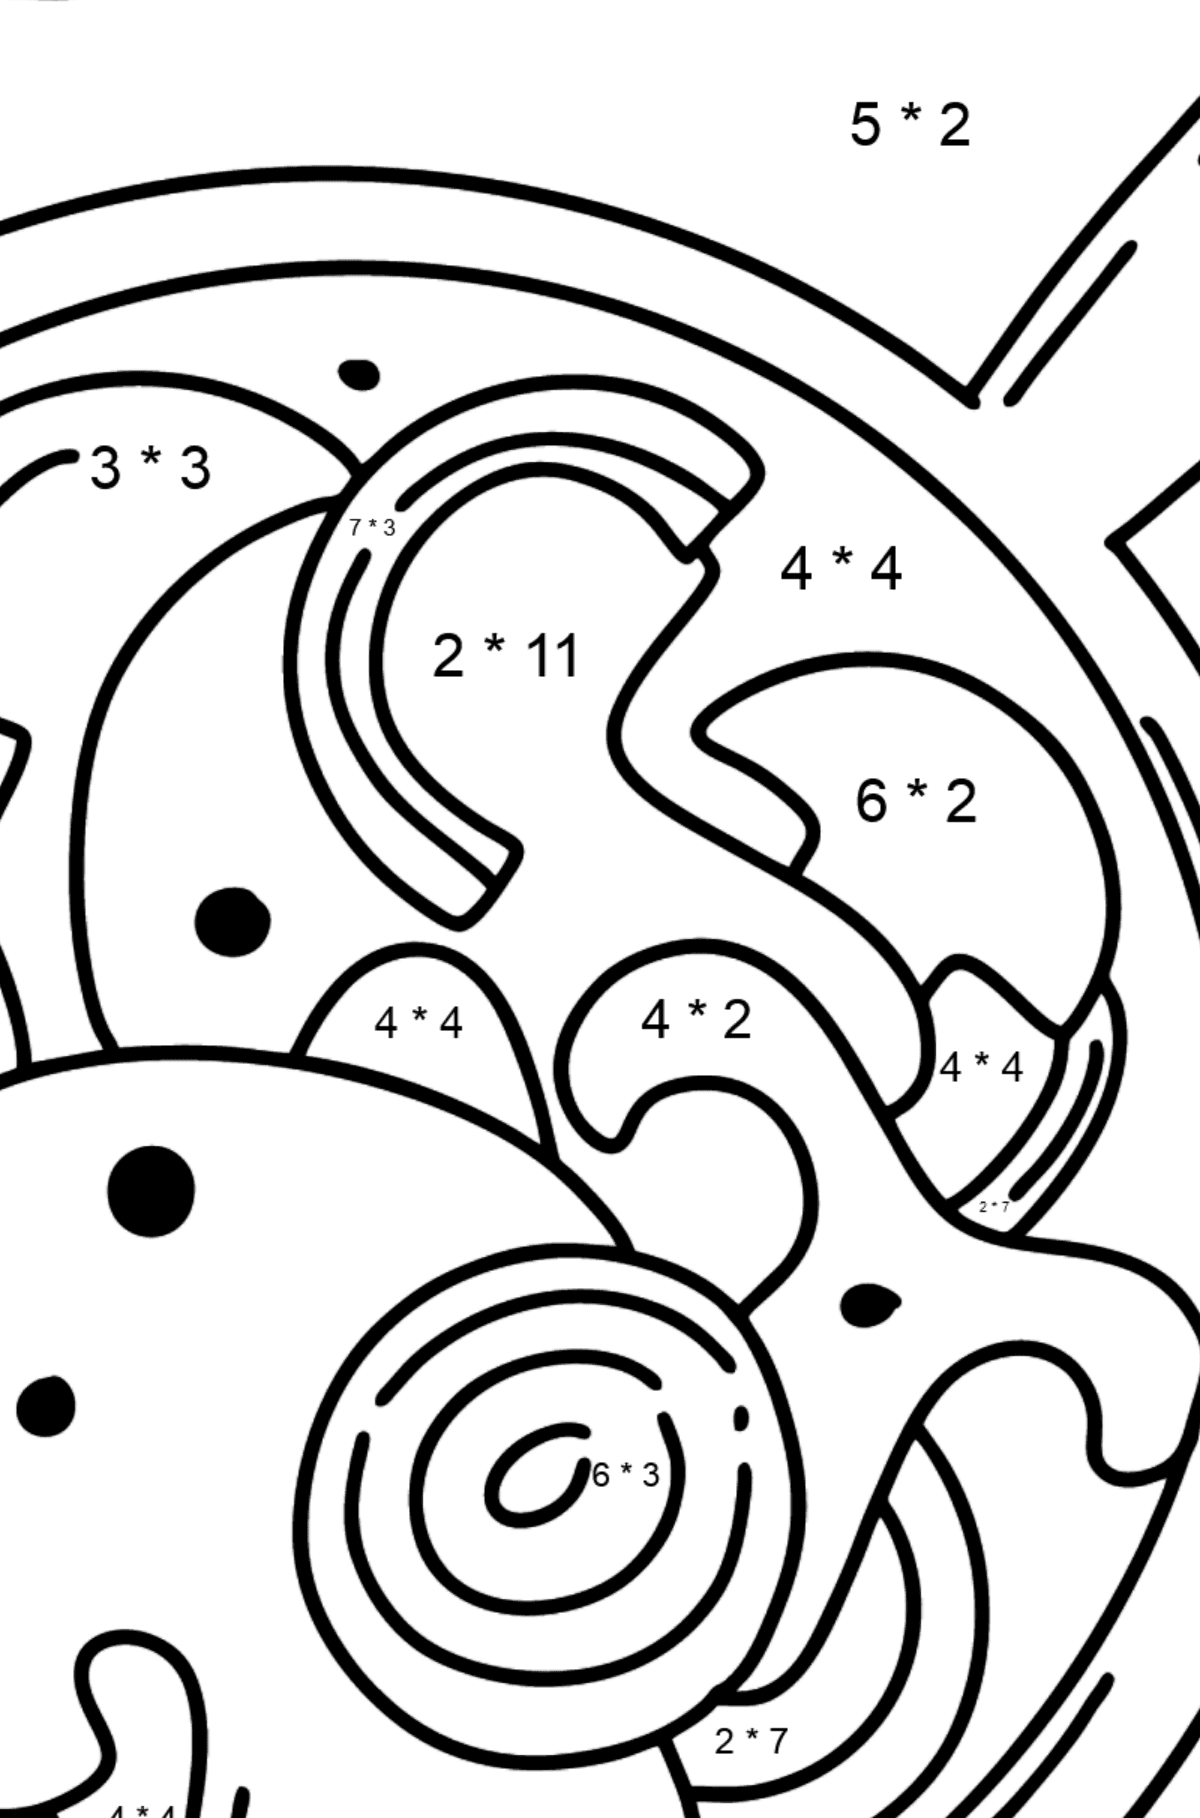 Mushrooms in Creamy Sauce coloring page - Math Coloring - Multiplication for Kids